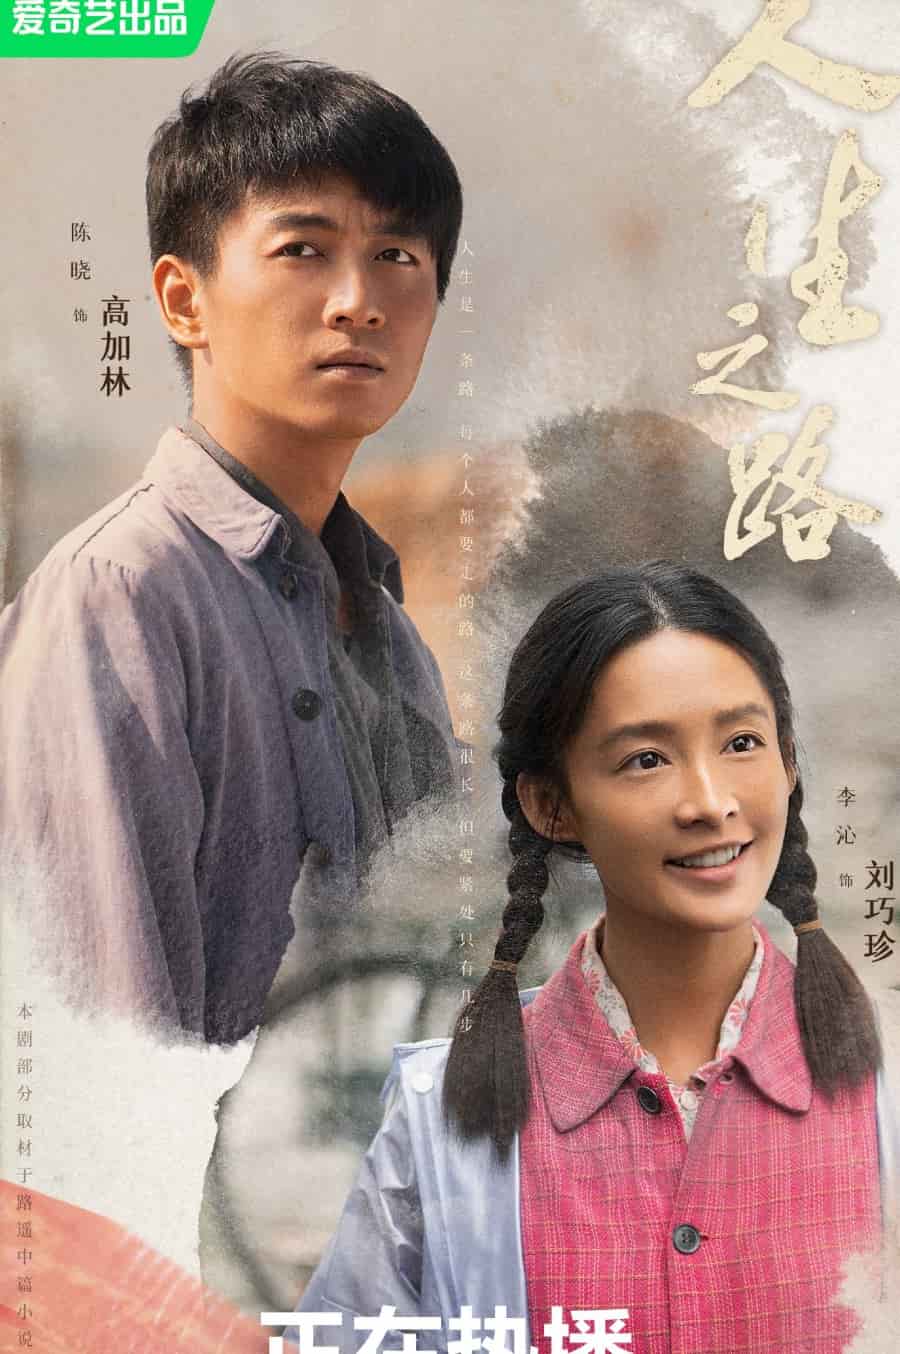 Miles To Go - Sinopsis, Pemain, OST, Episode, Review